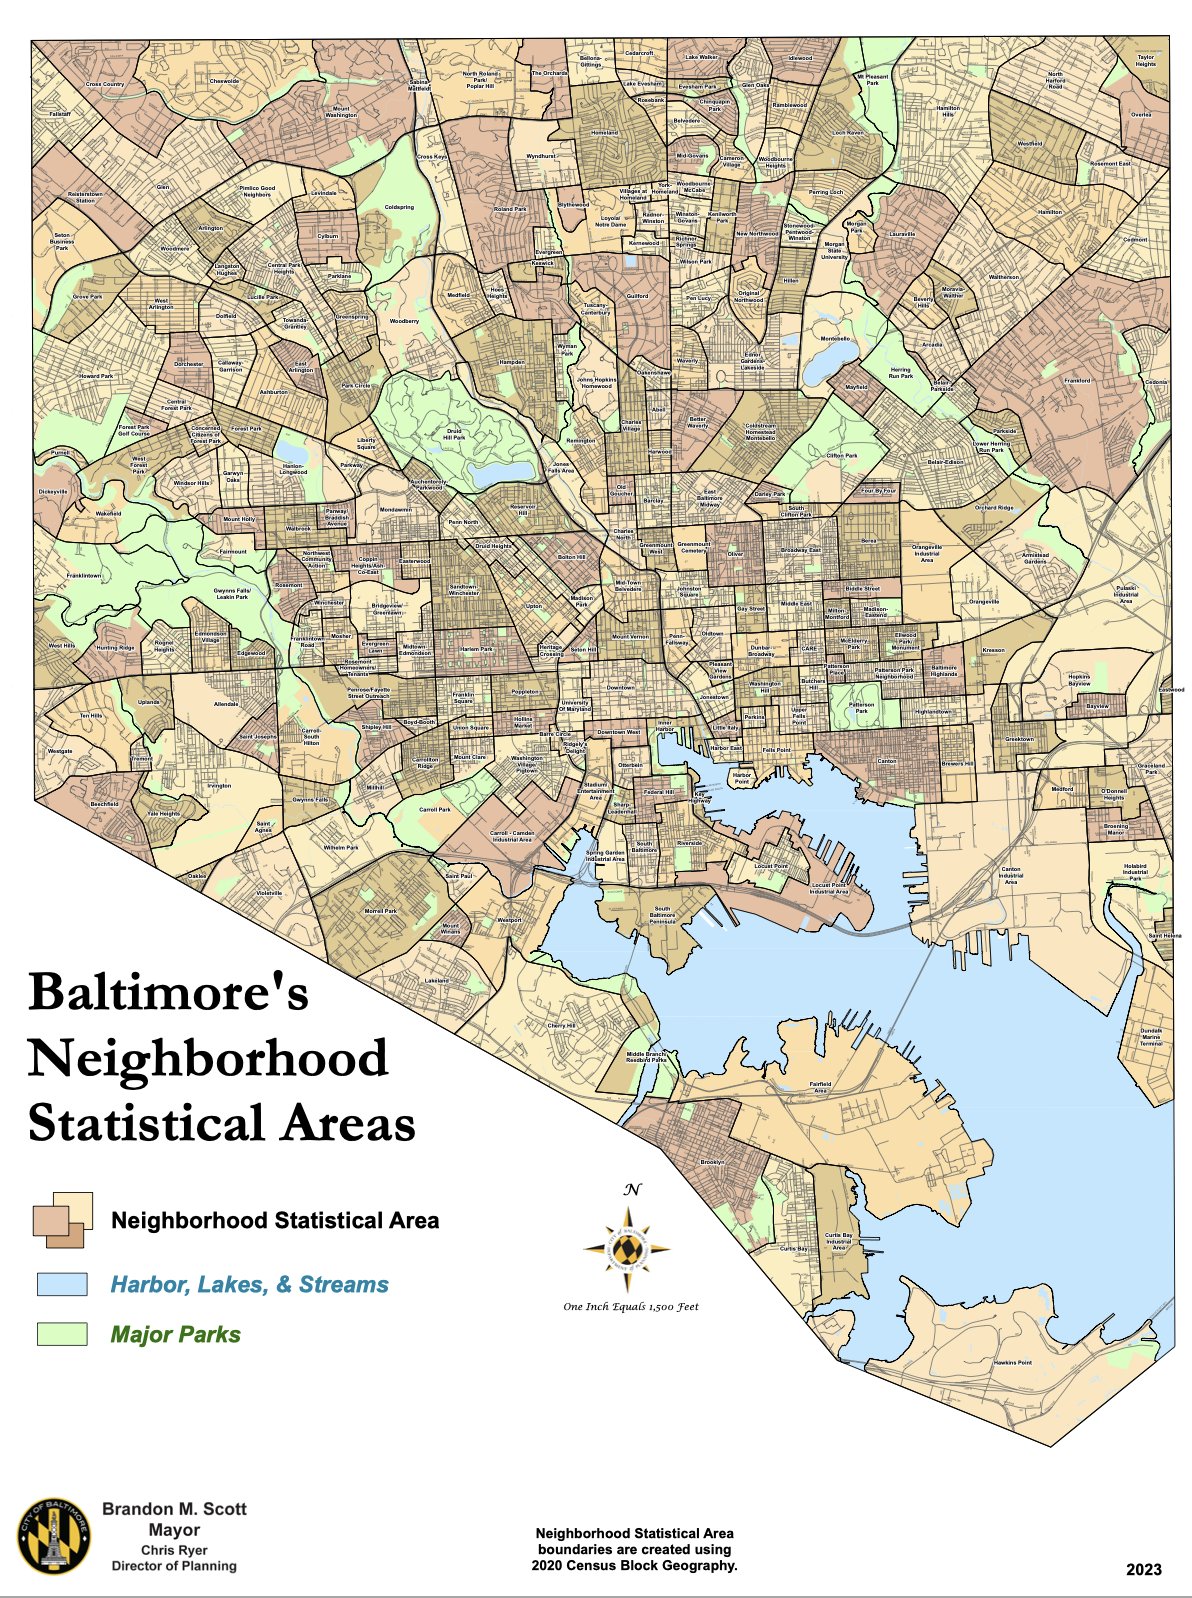 The official Baltimore neighborhoods map